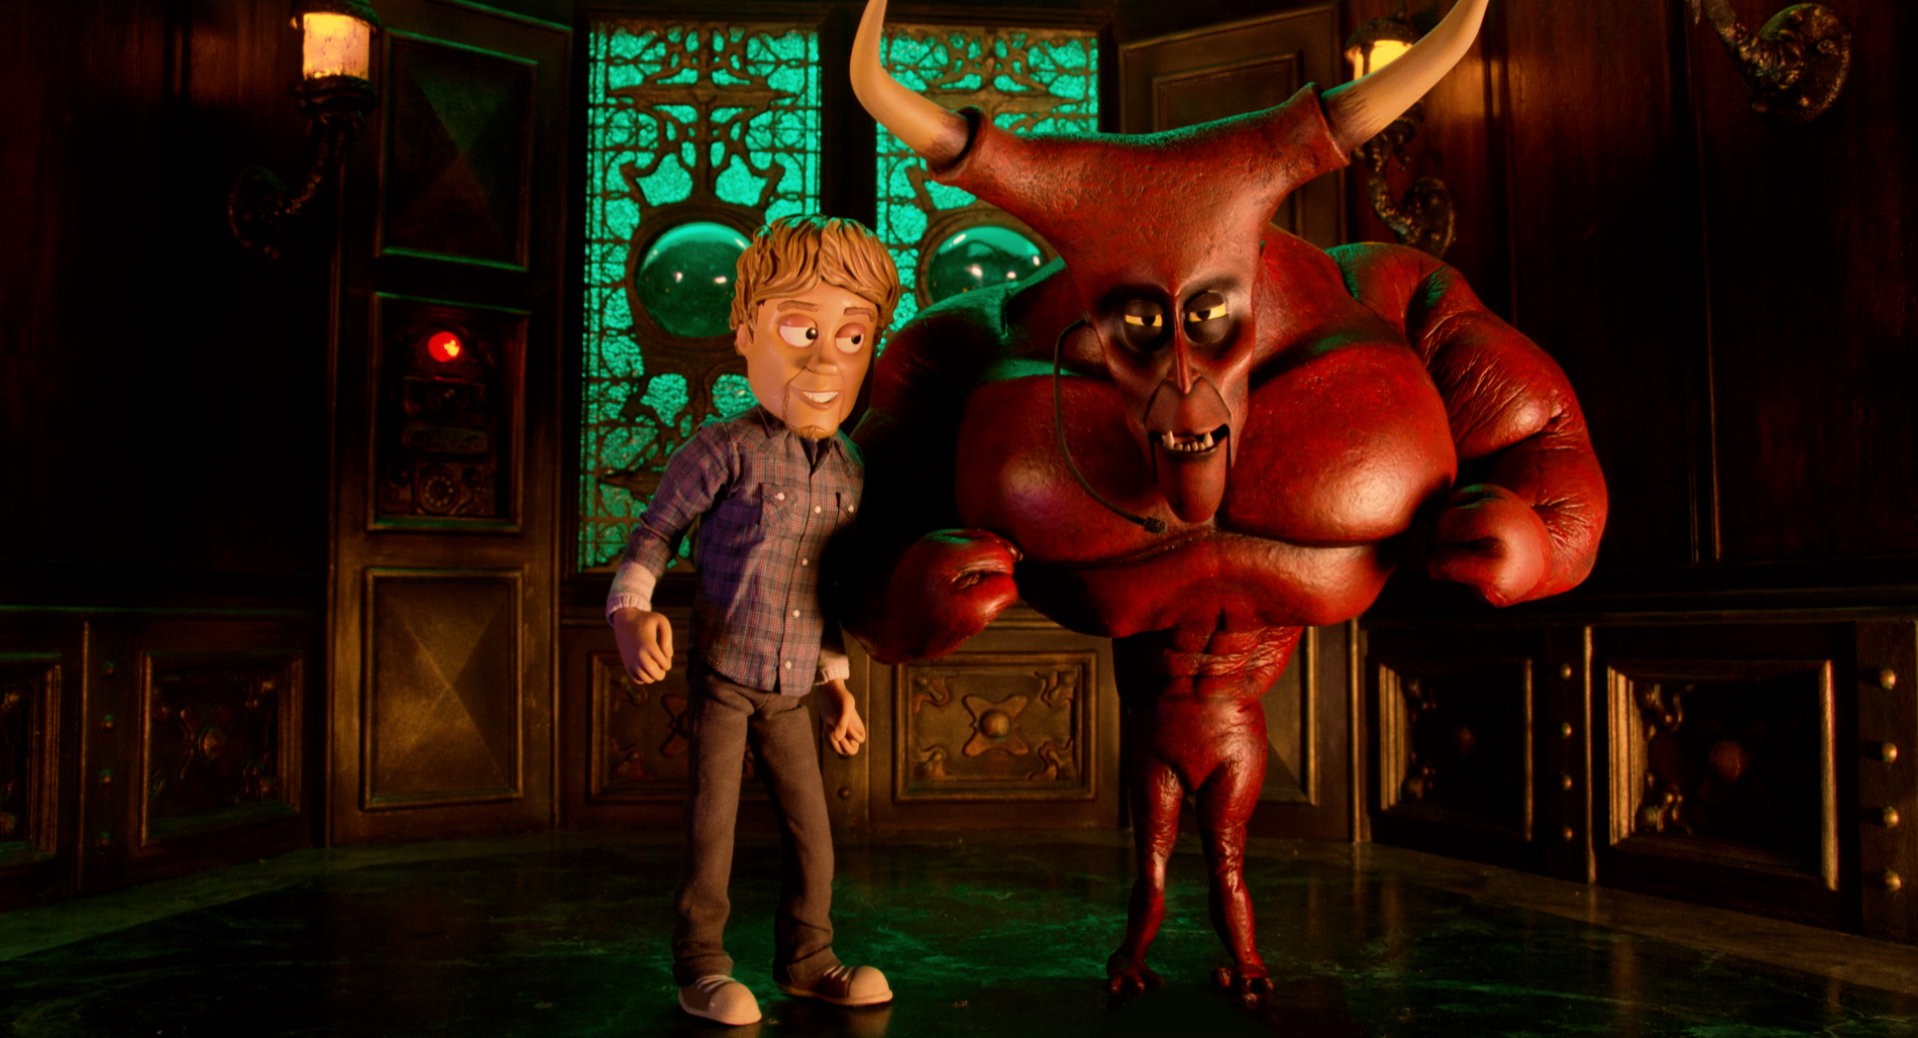 Curt and The Devil from Freestyle Releasing's Hell & Back (2015)